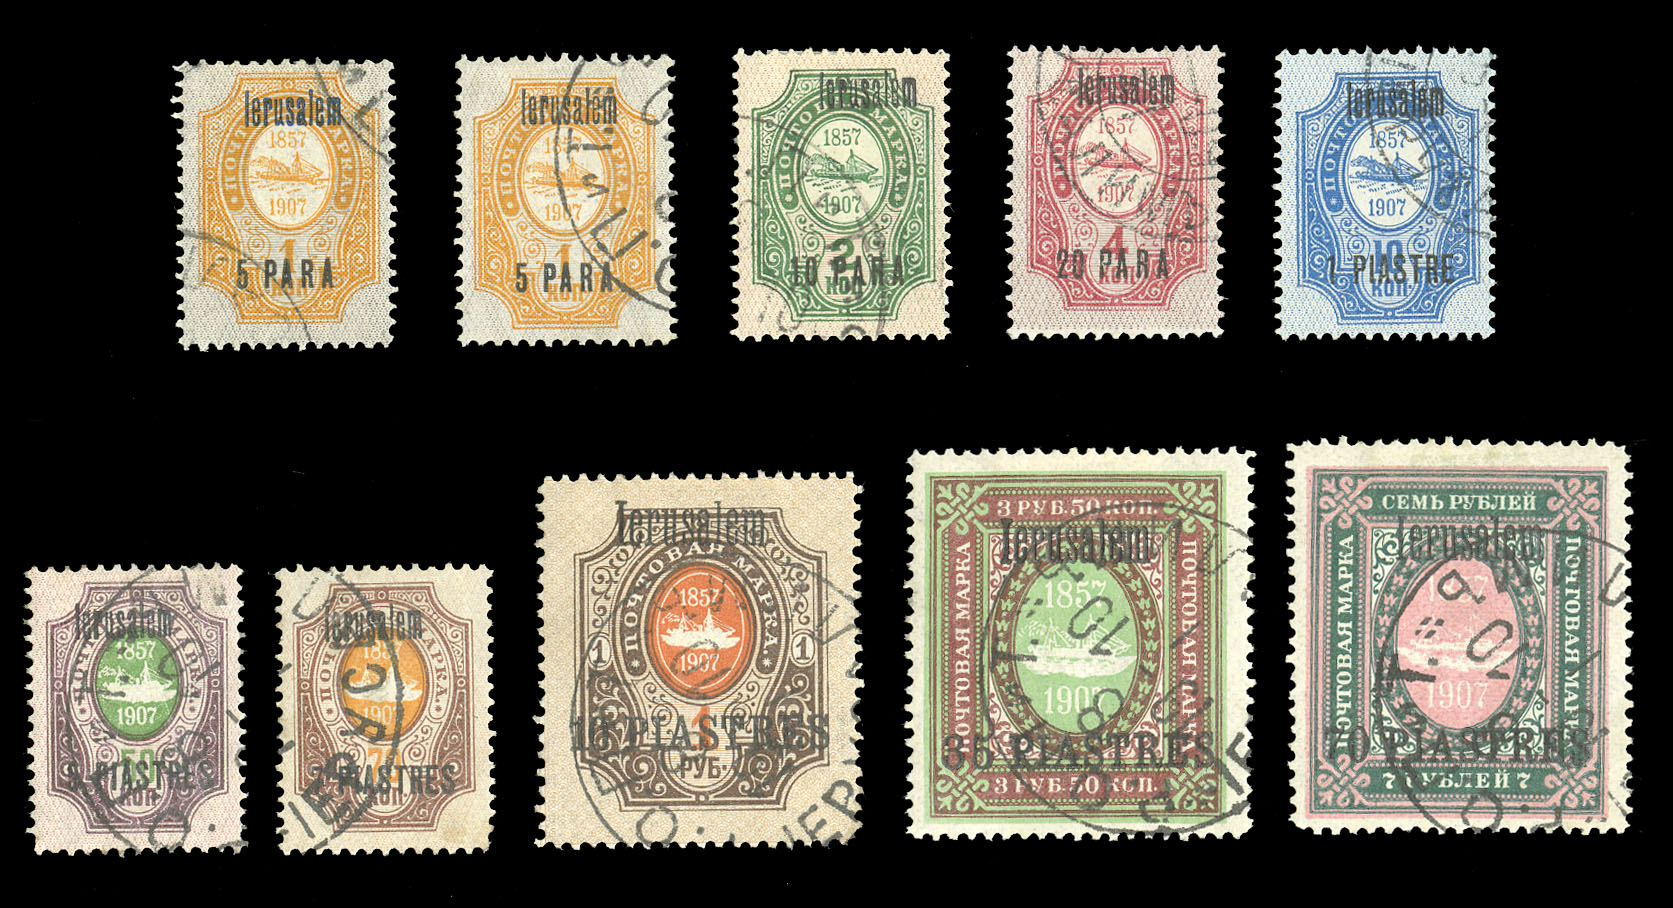 Lot 1251 - RUSSIA Russian Offices in China - Sinkiang  -  Cherrystone Auctions U.S. & Worldwide Stamps & Postal History